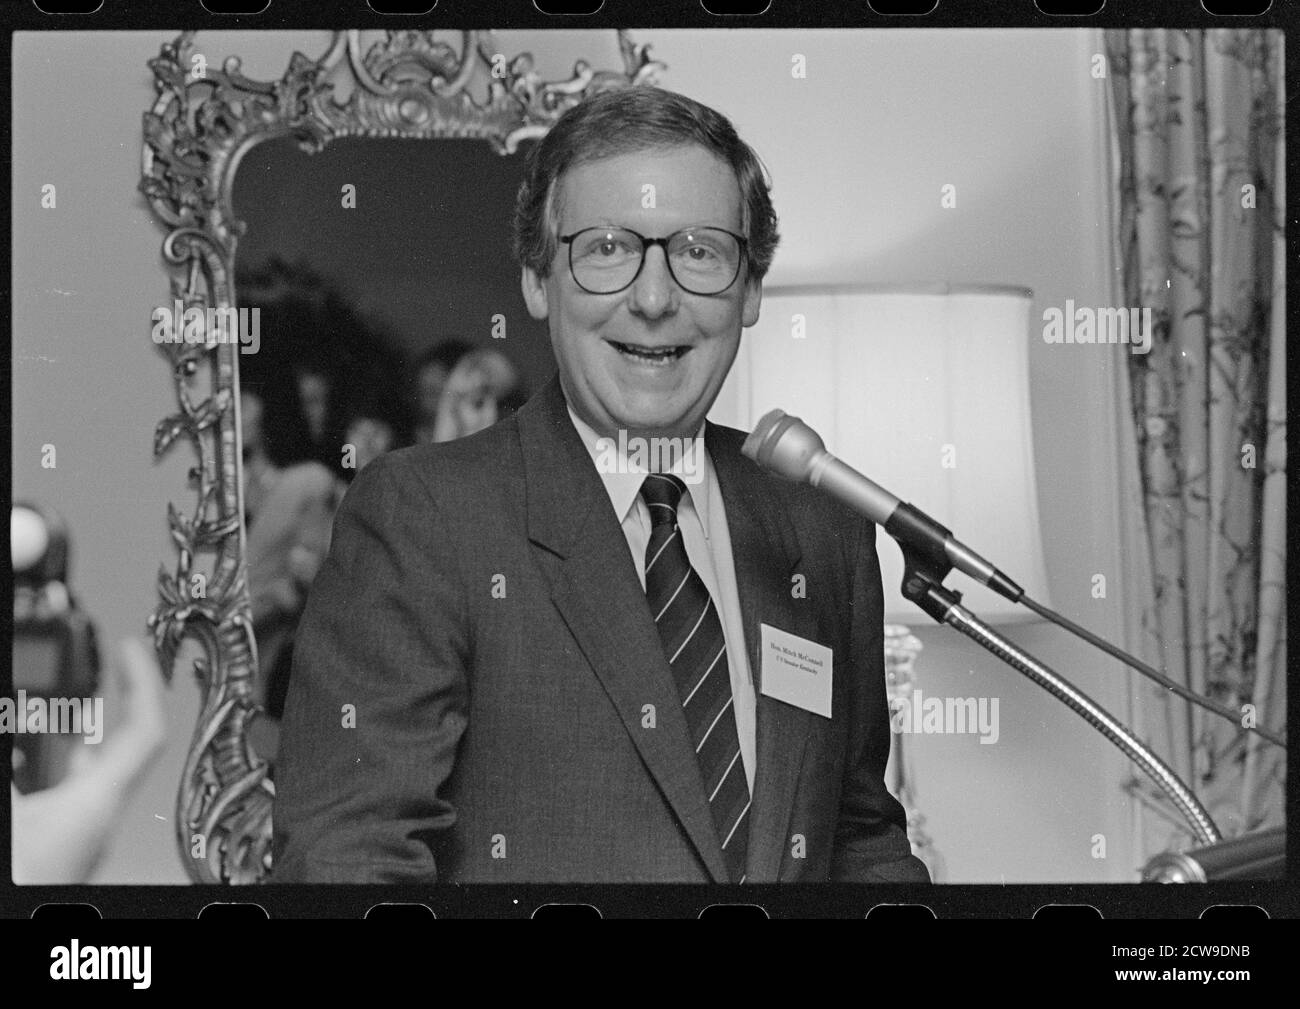 Smiling Senator Mitch McConnell, head-and-shoulders portrait, facing front, speaking at microphone at a gathering of Republican Party women candidates, Washington, DC, 6/1992. (Photo by Laura Patterson/CQ Roll Call Collection/RBM Vintage Images) Stock Photo